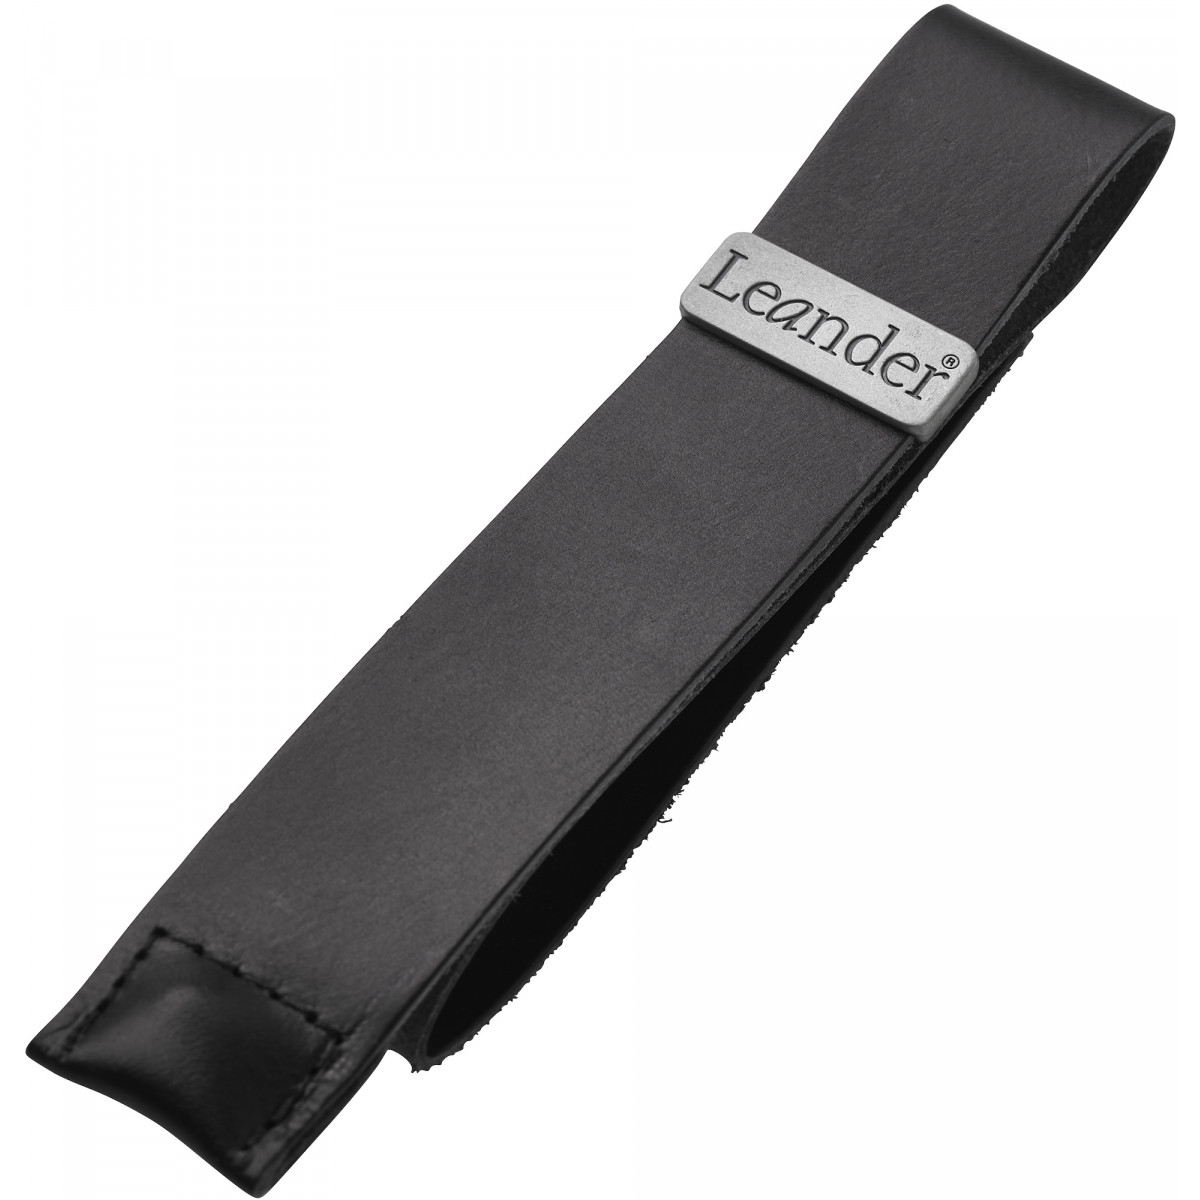 Leather strap for Classic safety bar - Black